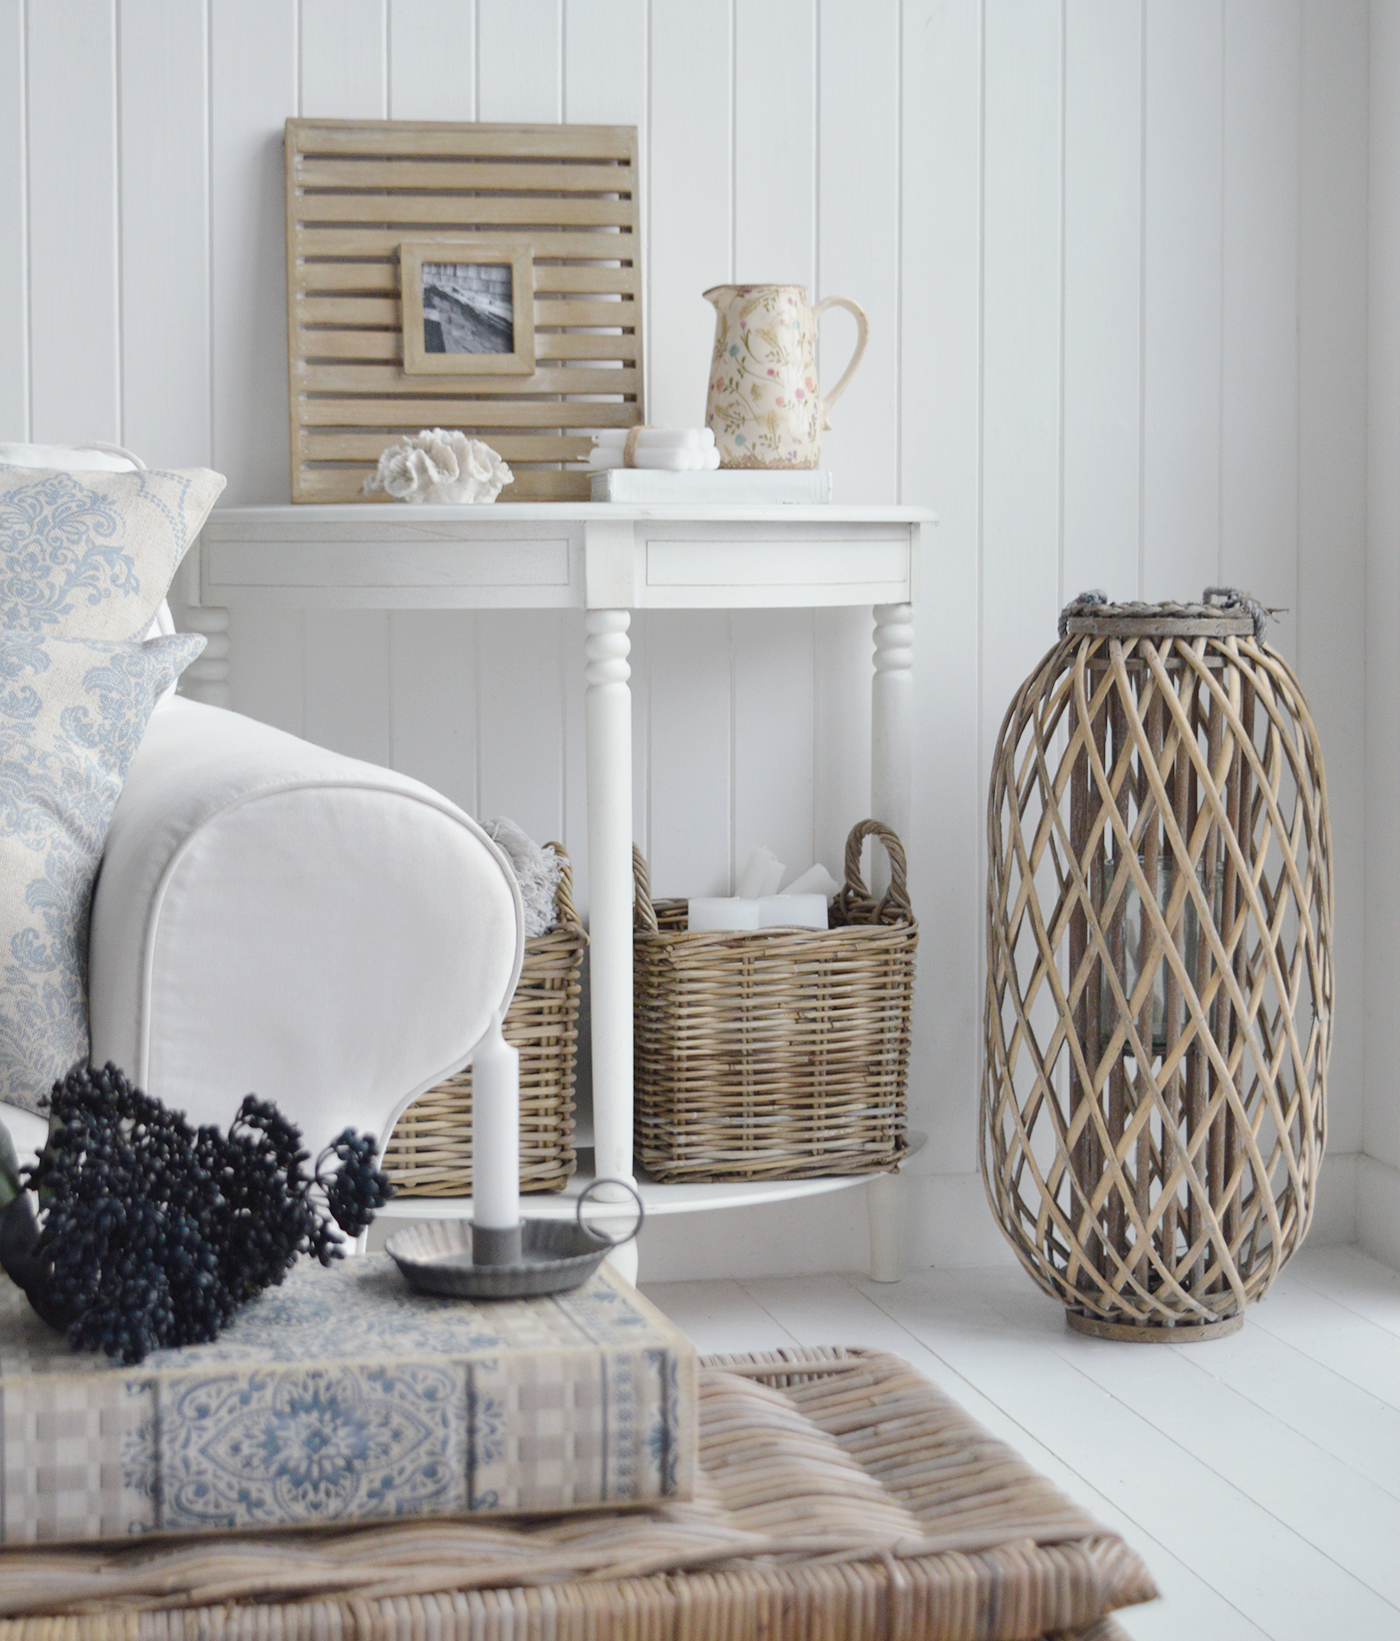 An example of modern farmhouse and coastal style furniture and how each complements each other. The grey willow large lantern againes the white furniture in the Cape Anne range